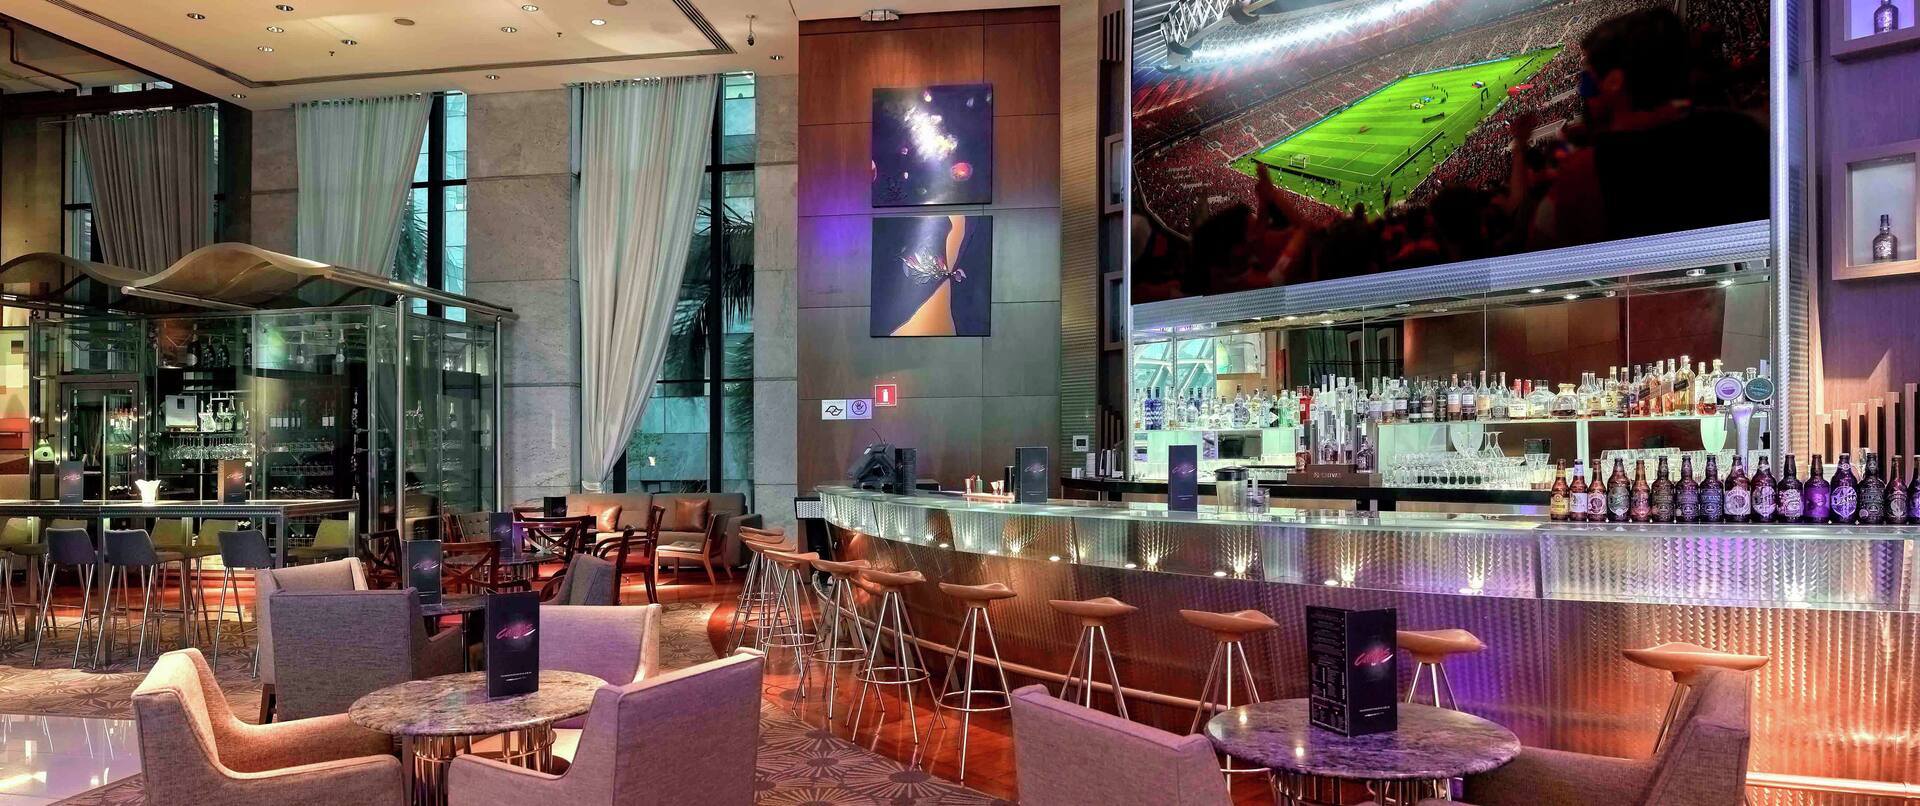 Sports Bar with Seating Area